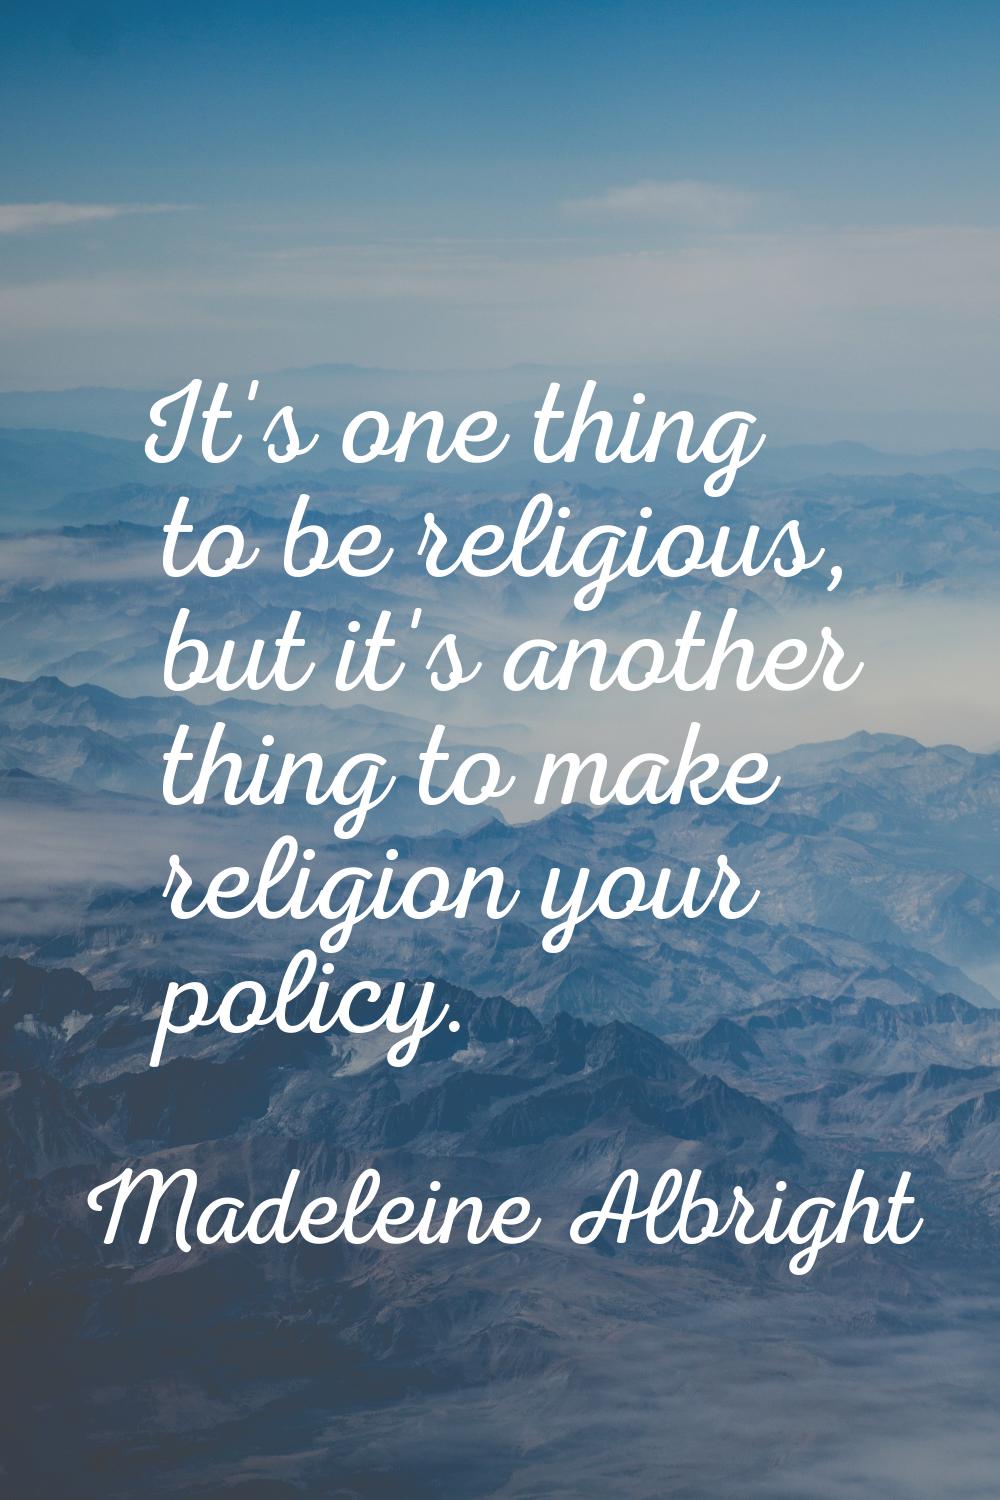 It's one thing to be religious, but it's another thing to make religion your policy.